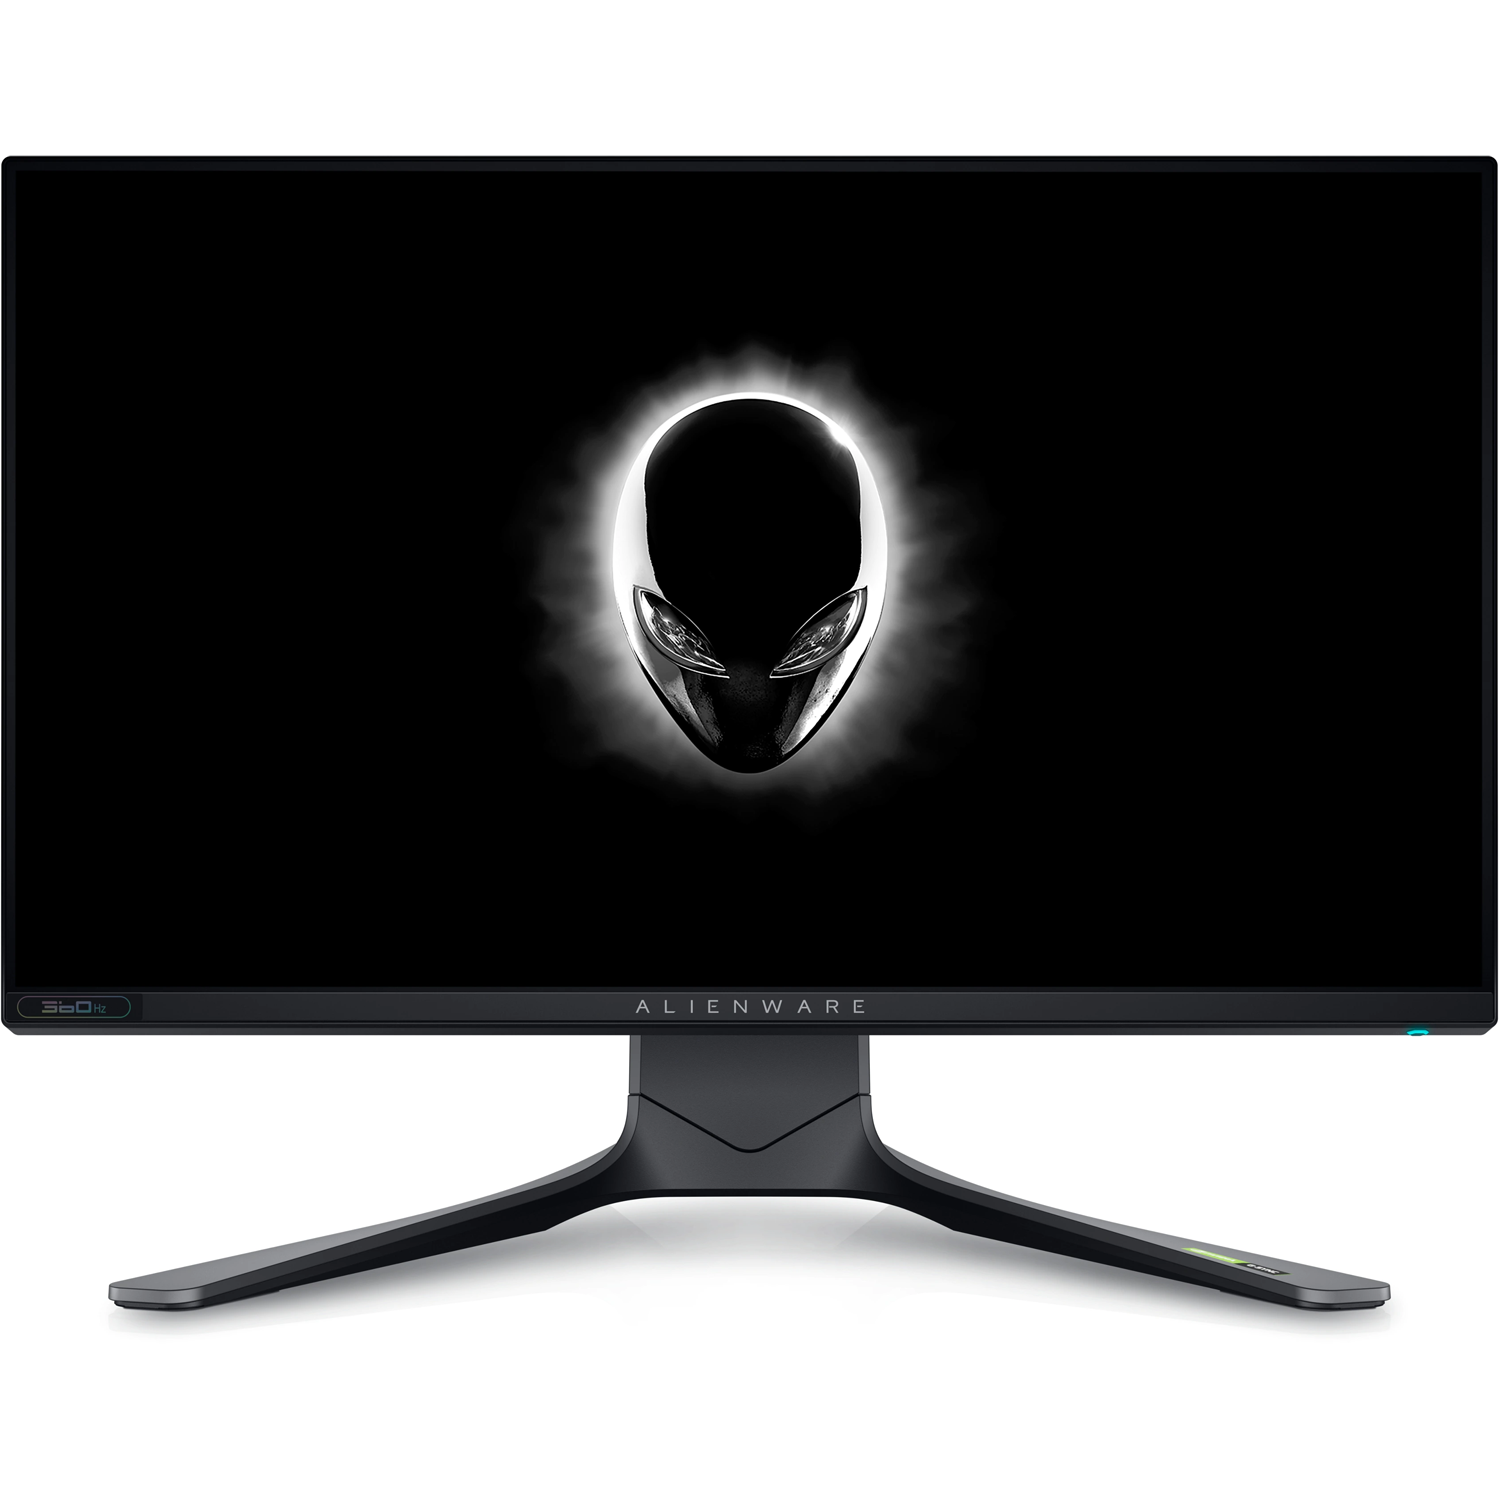 This blisteringly quick 360Hz Alienware tune is $300 off